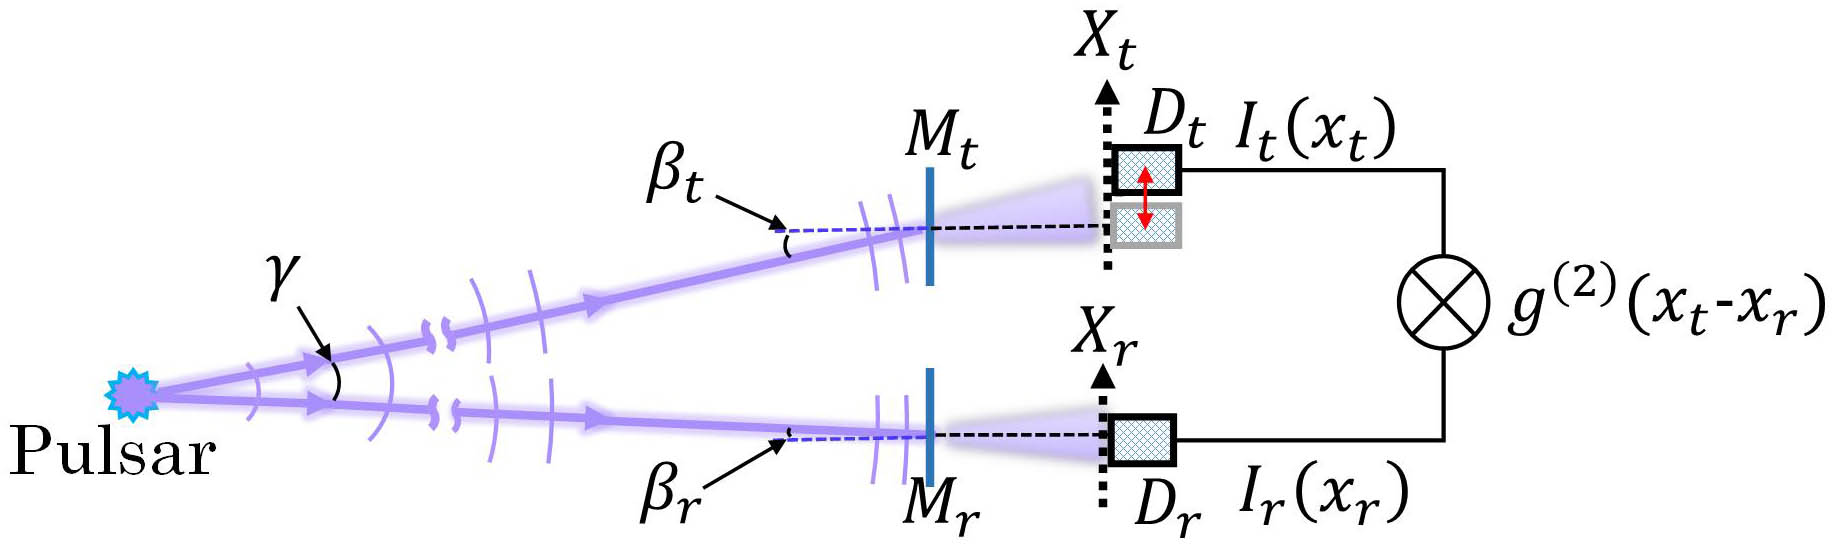 Illustration for the method of measuring the observing angle of a pulsar based on SMXIC.